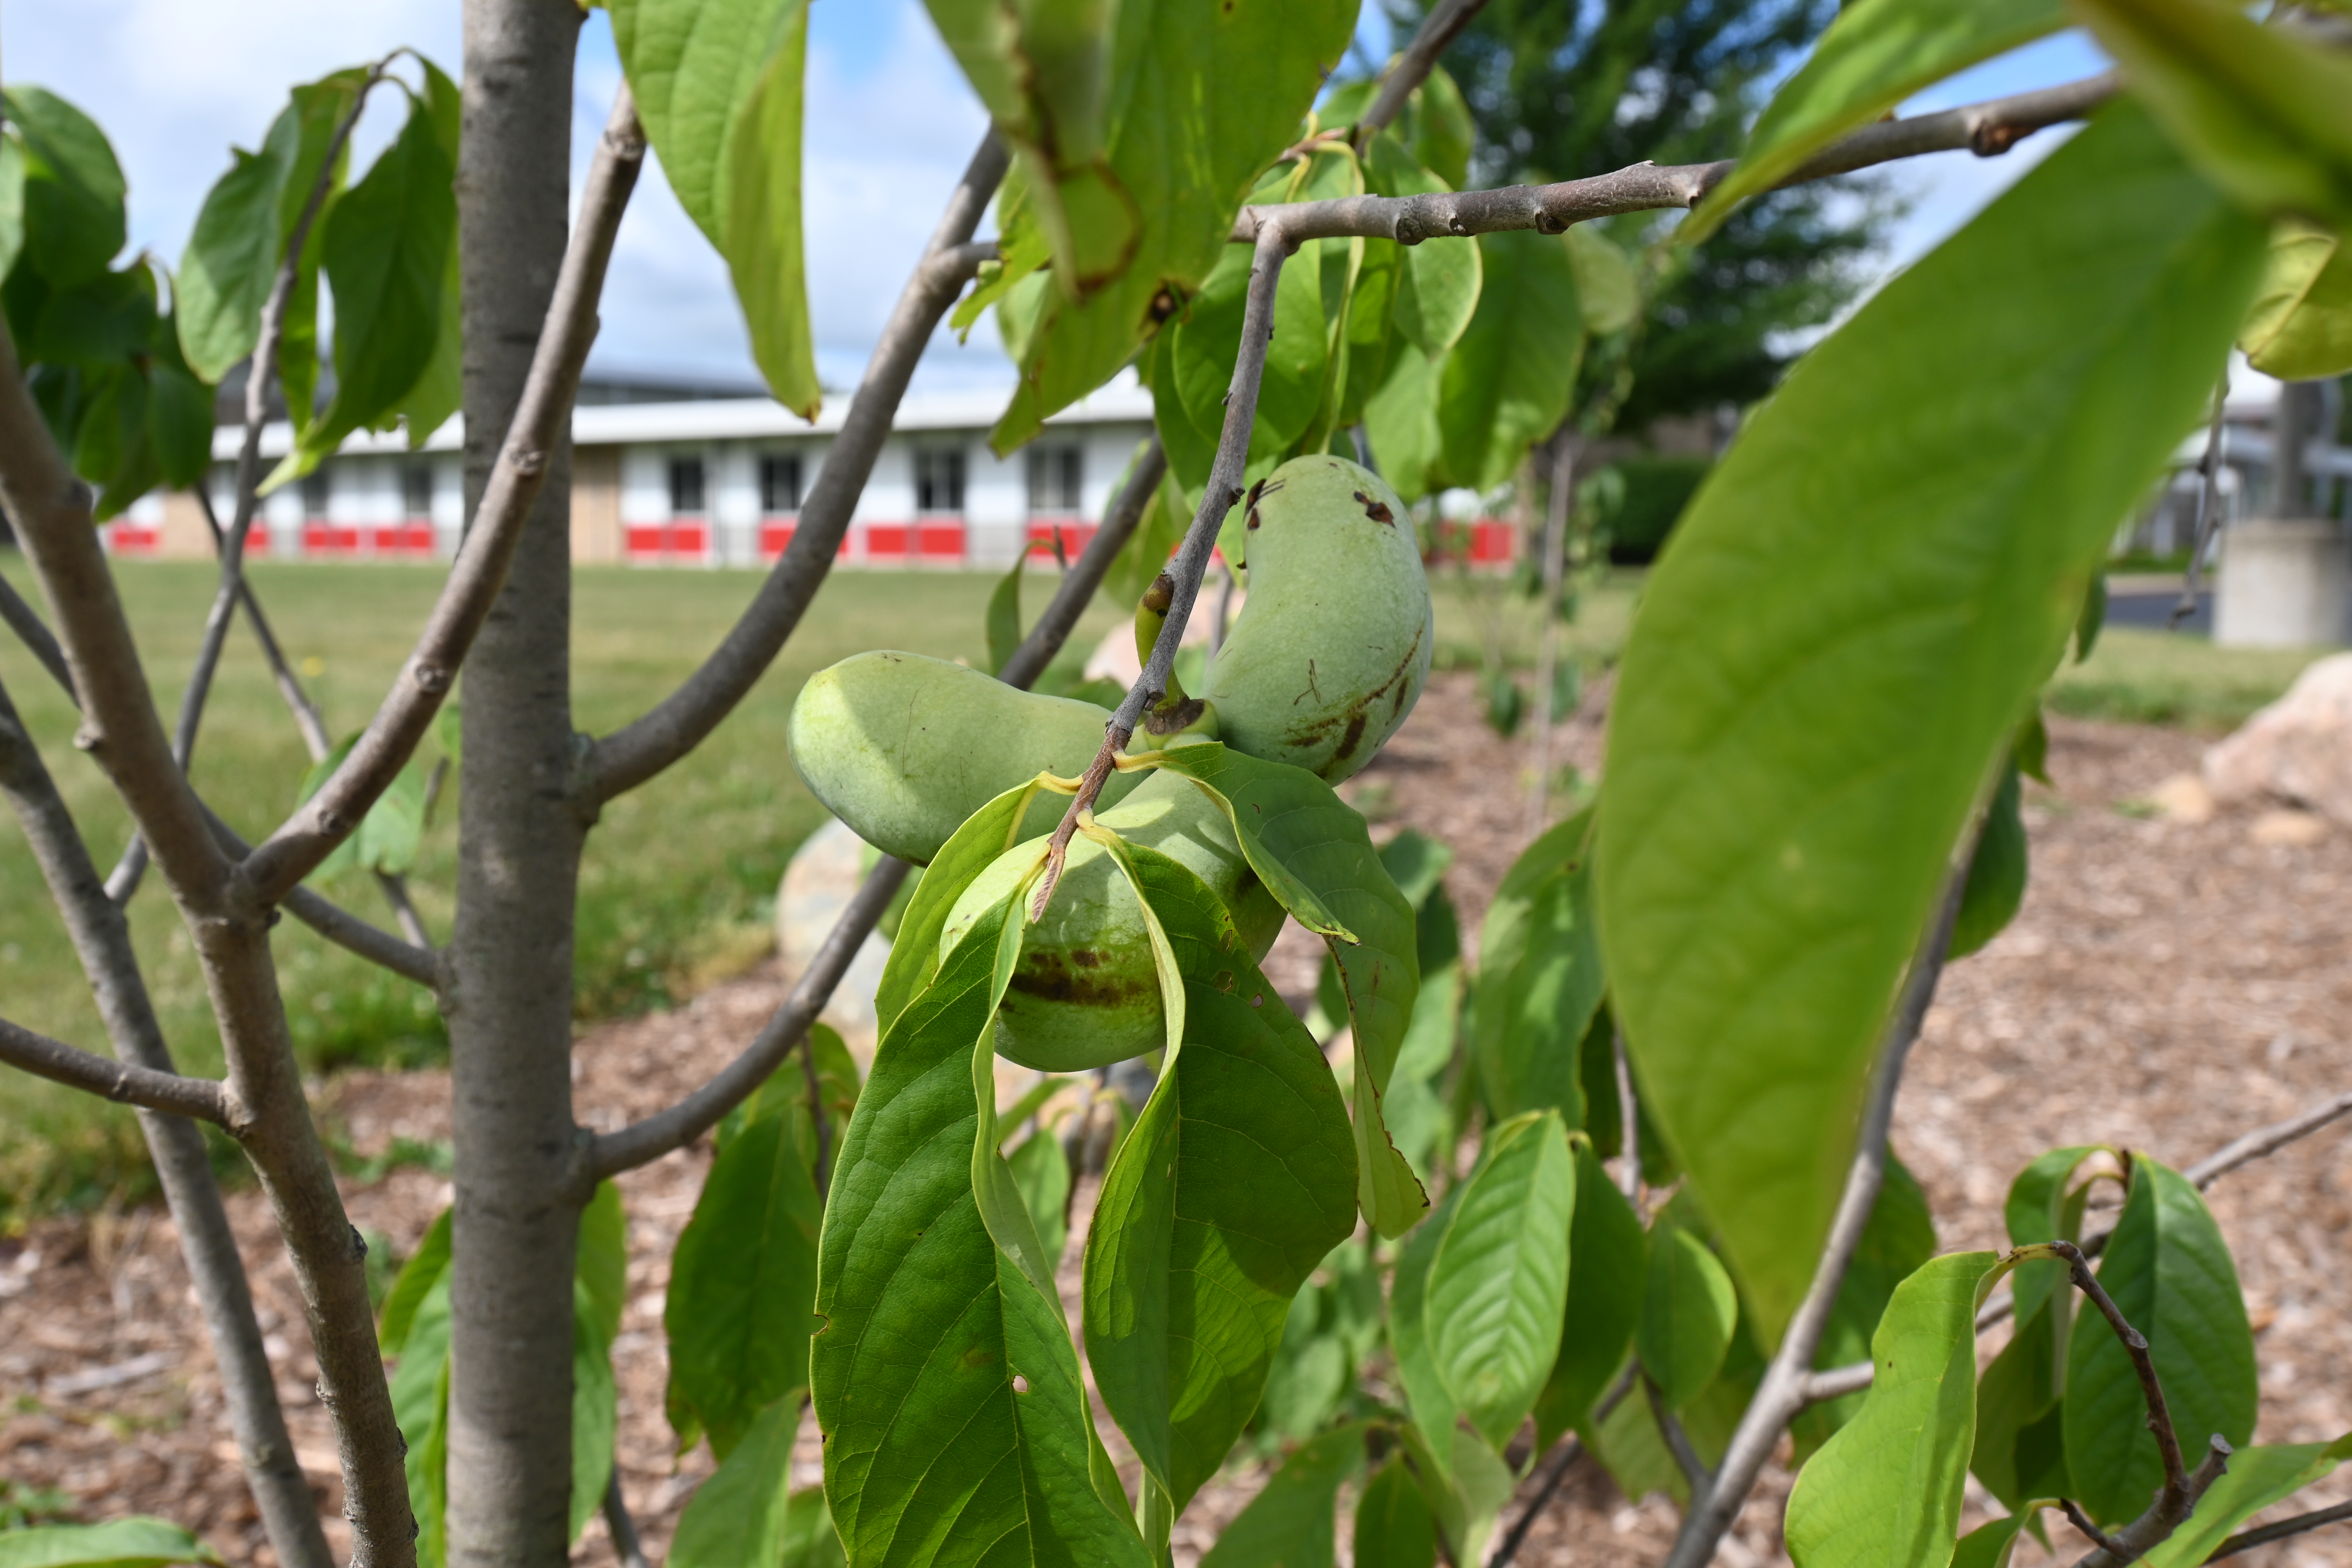 Paw Paw fruit growing on our Paw Paw trees.